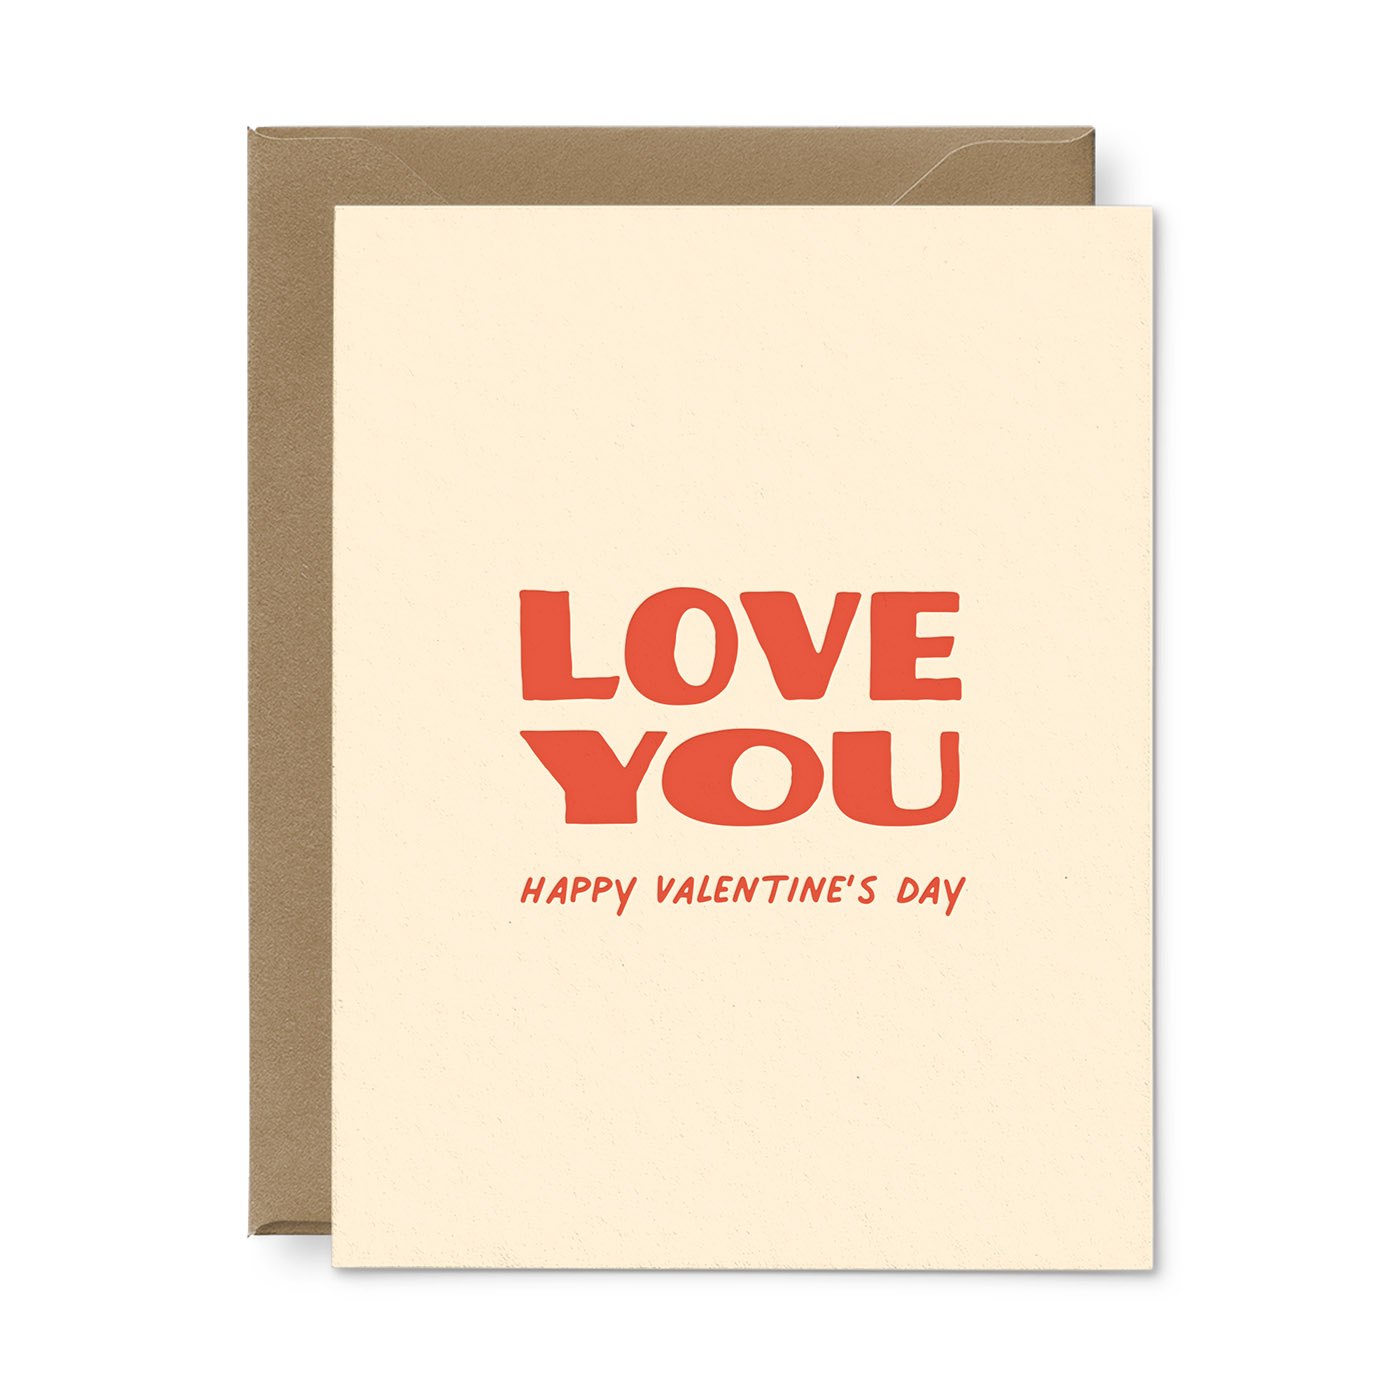 Love You Valentine's Day Greeting Card - Ruff House Print Shop